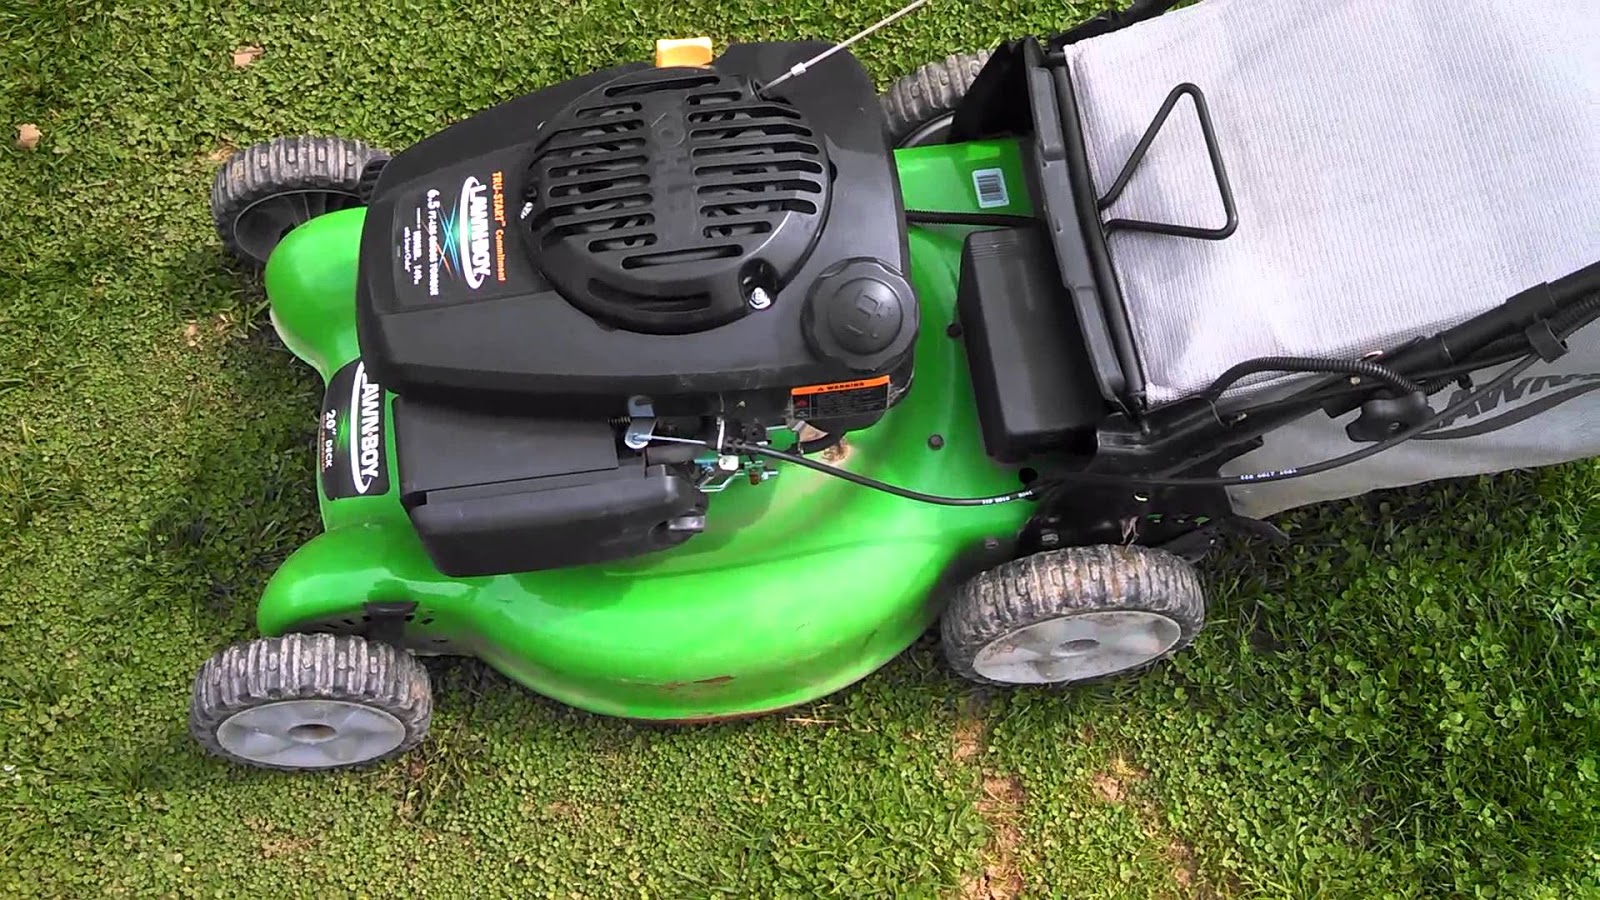 The Way To Change The Oil On A Lawn Boy 6 5 Push Mower Best Manual Lawn Aerator